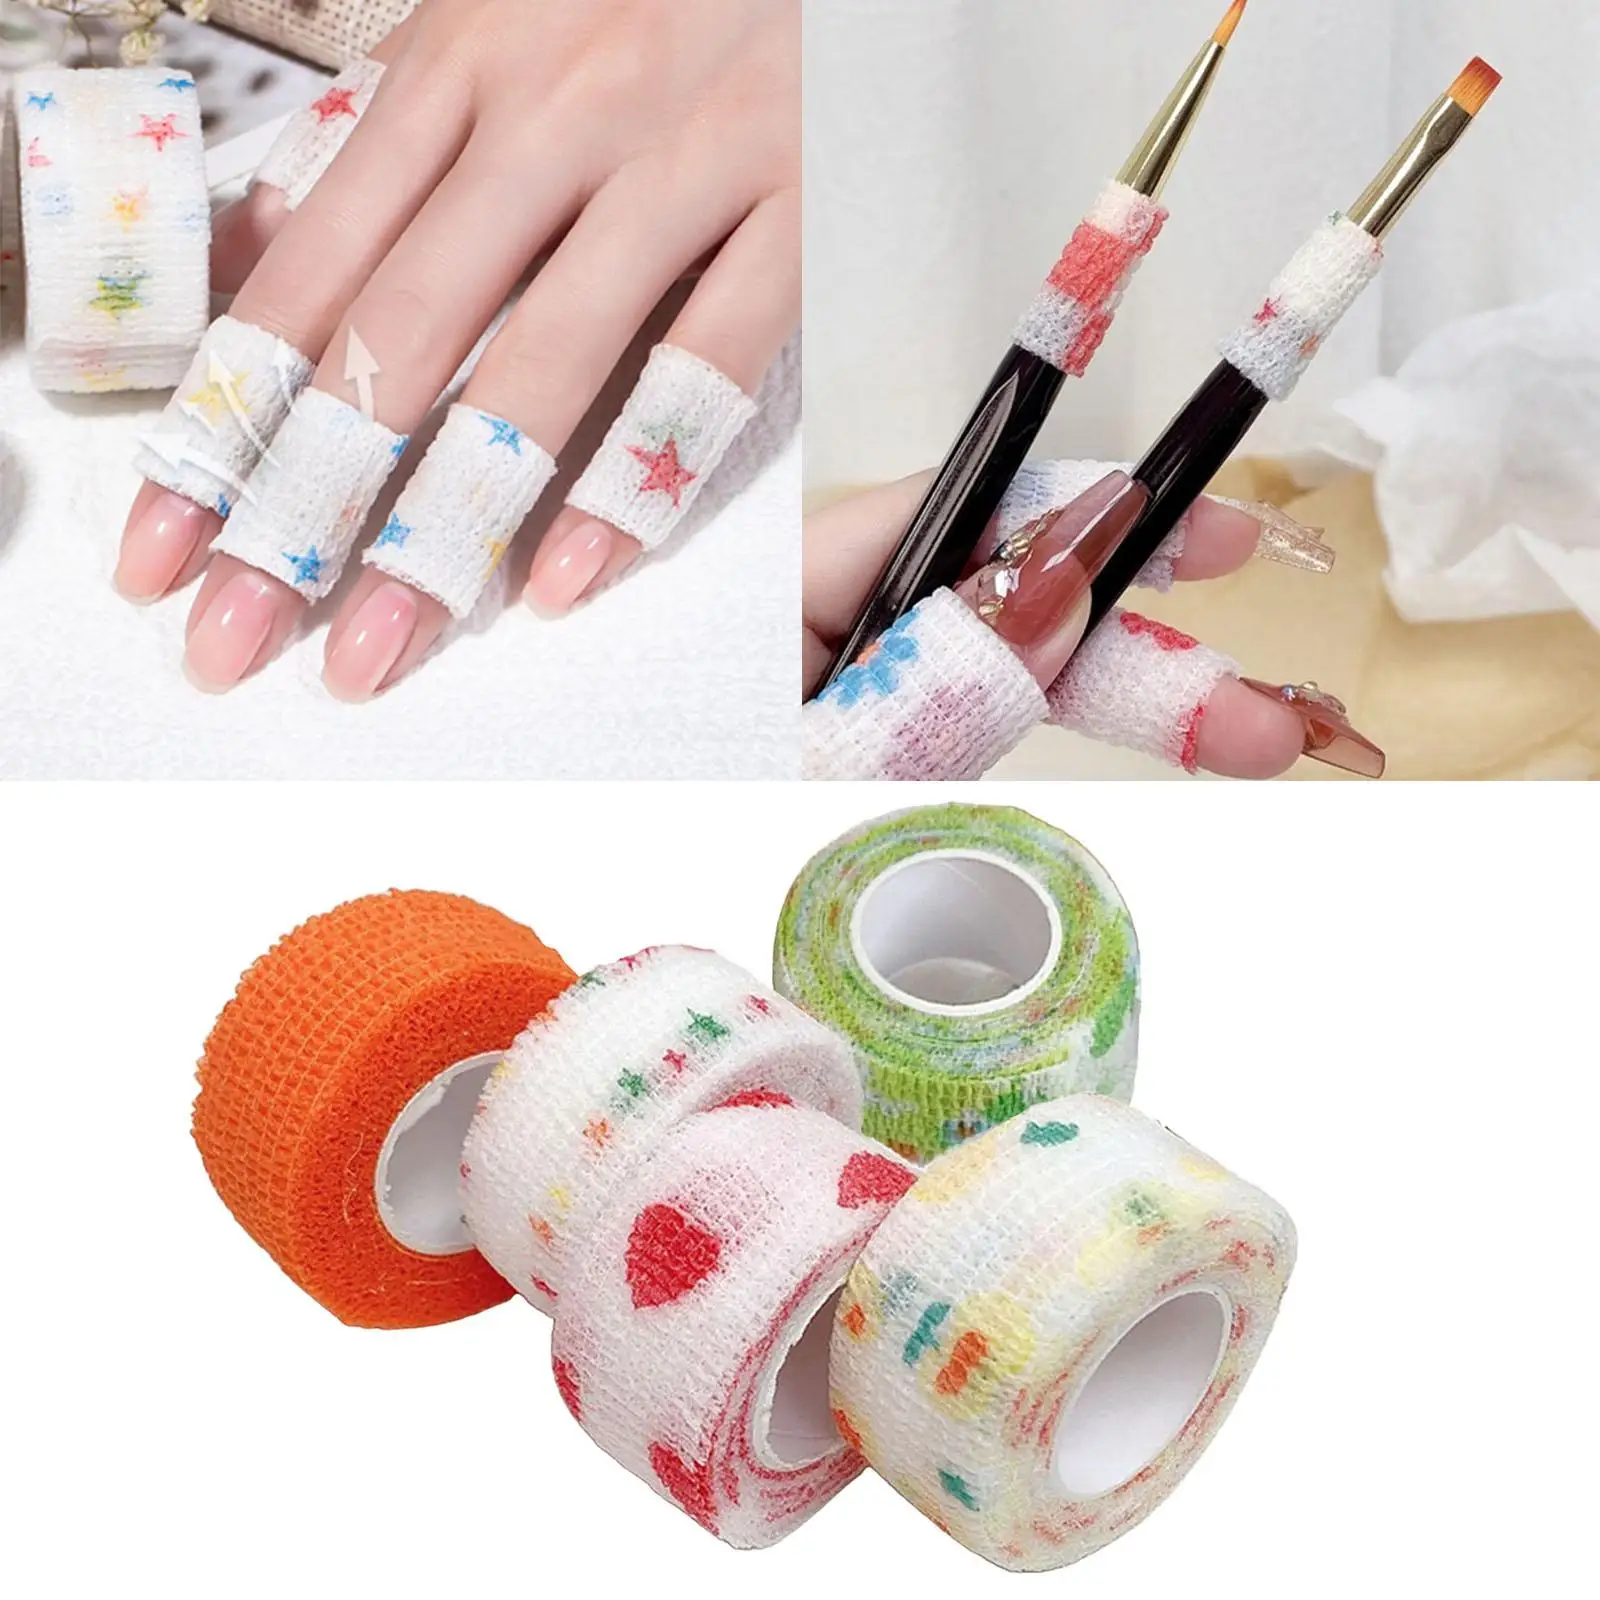 5Pcs Self Adherent Cohesive Bandages Non Woven Elastic Cover Width 2.5cm Random Color Waterproof for Nail 